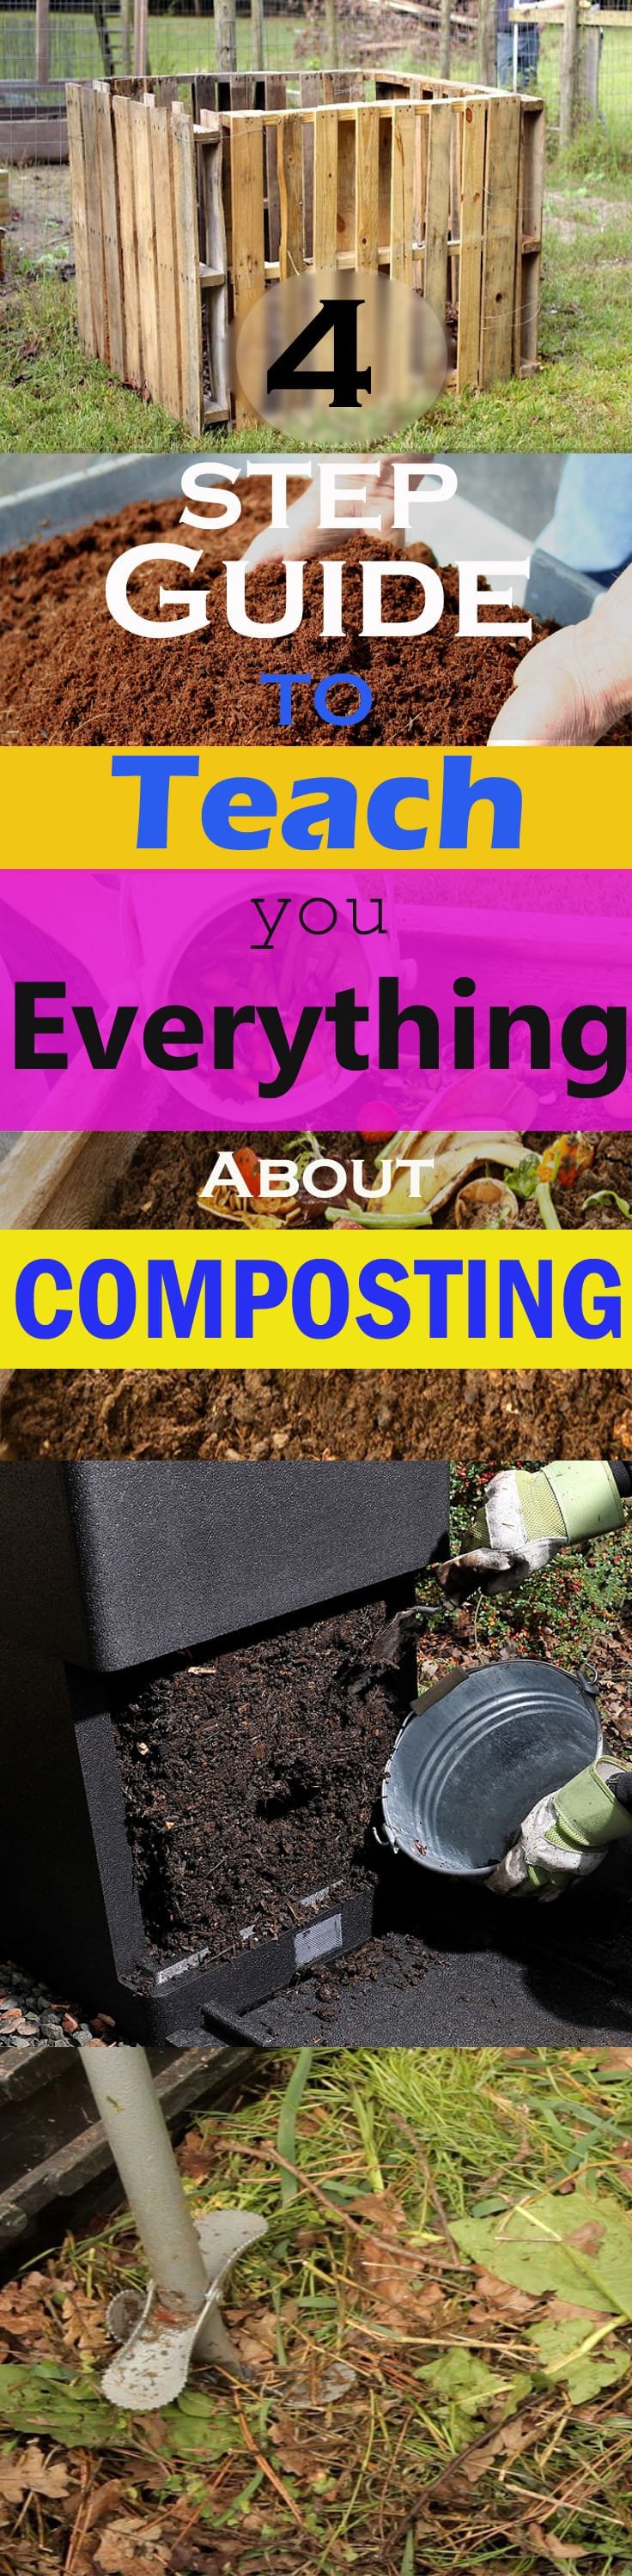 New to composting? Read on this 4 step COMPOSTING guide to learn everything you need to know to make your own compost!